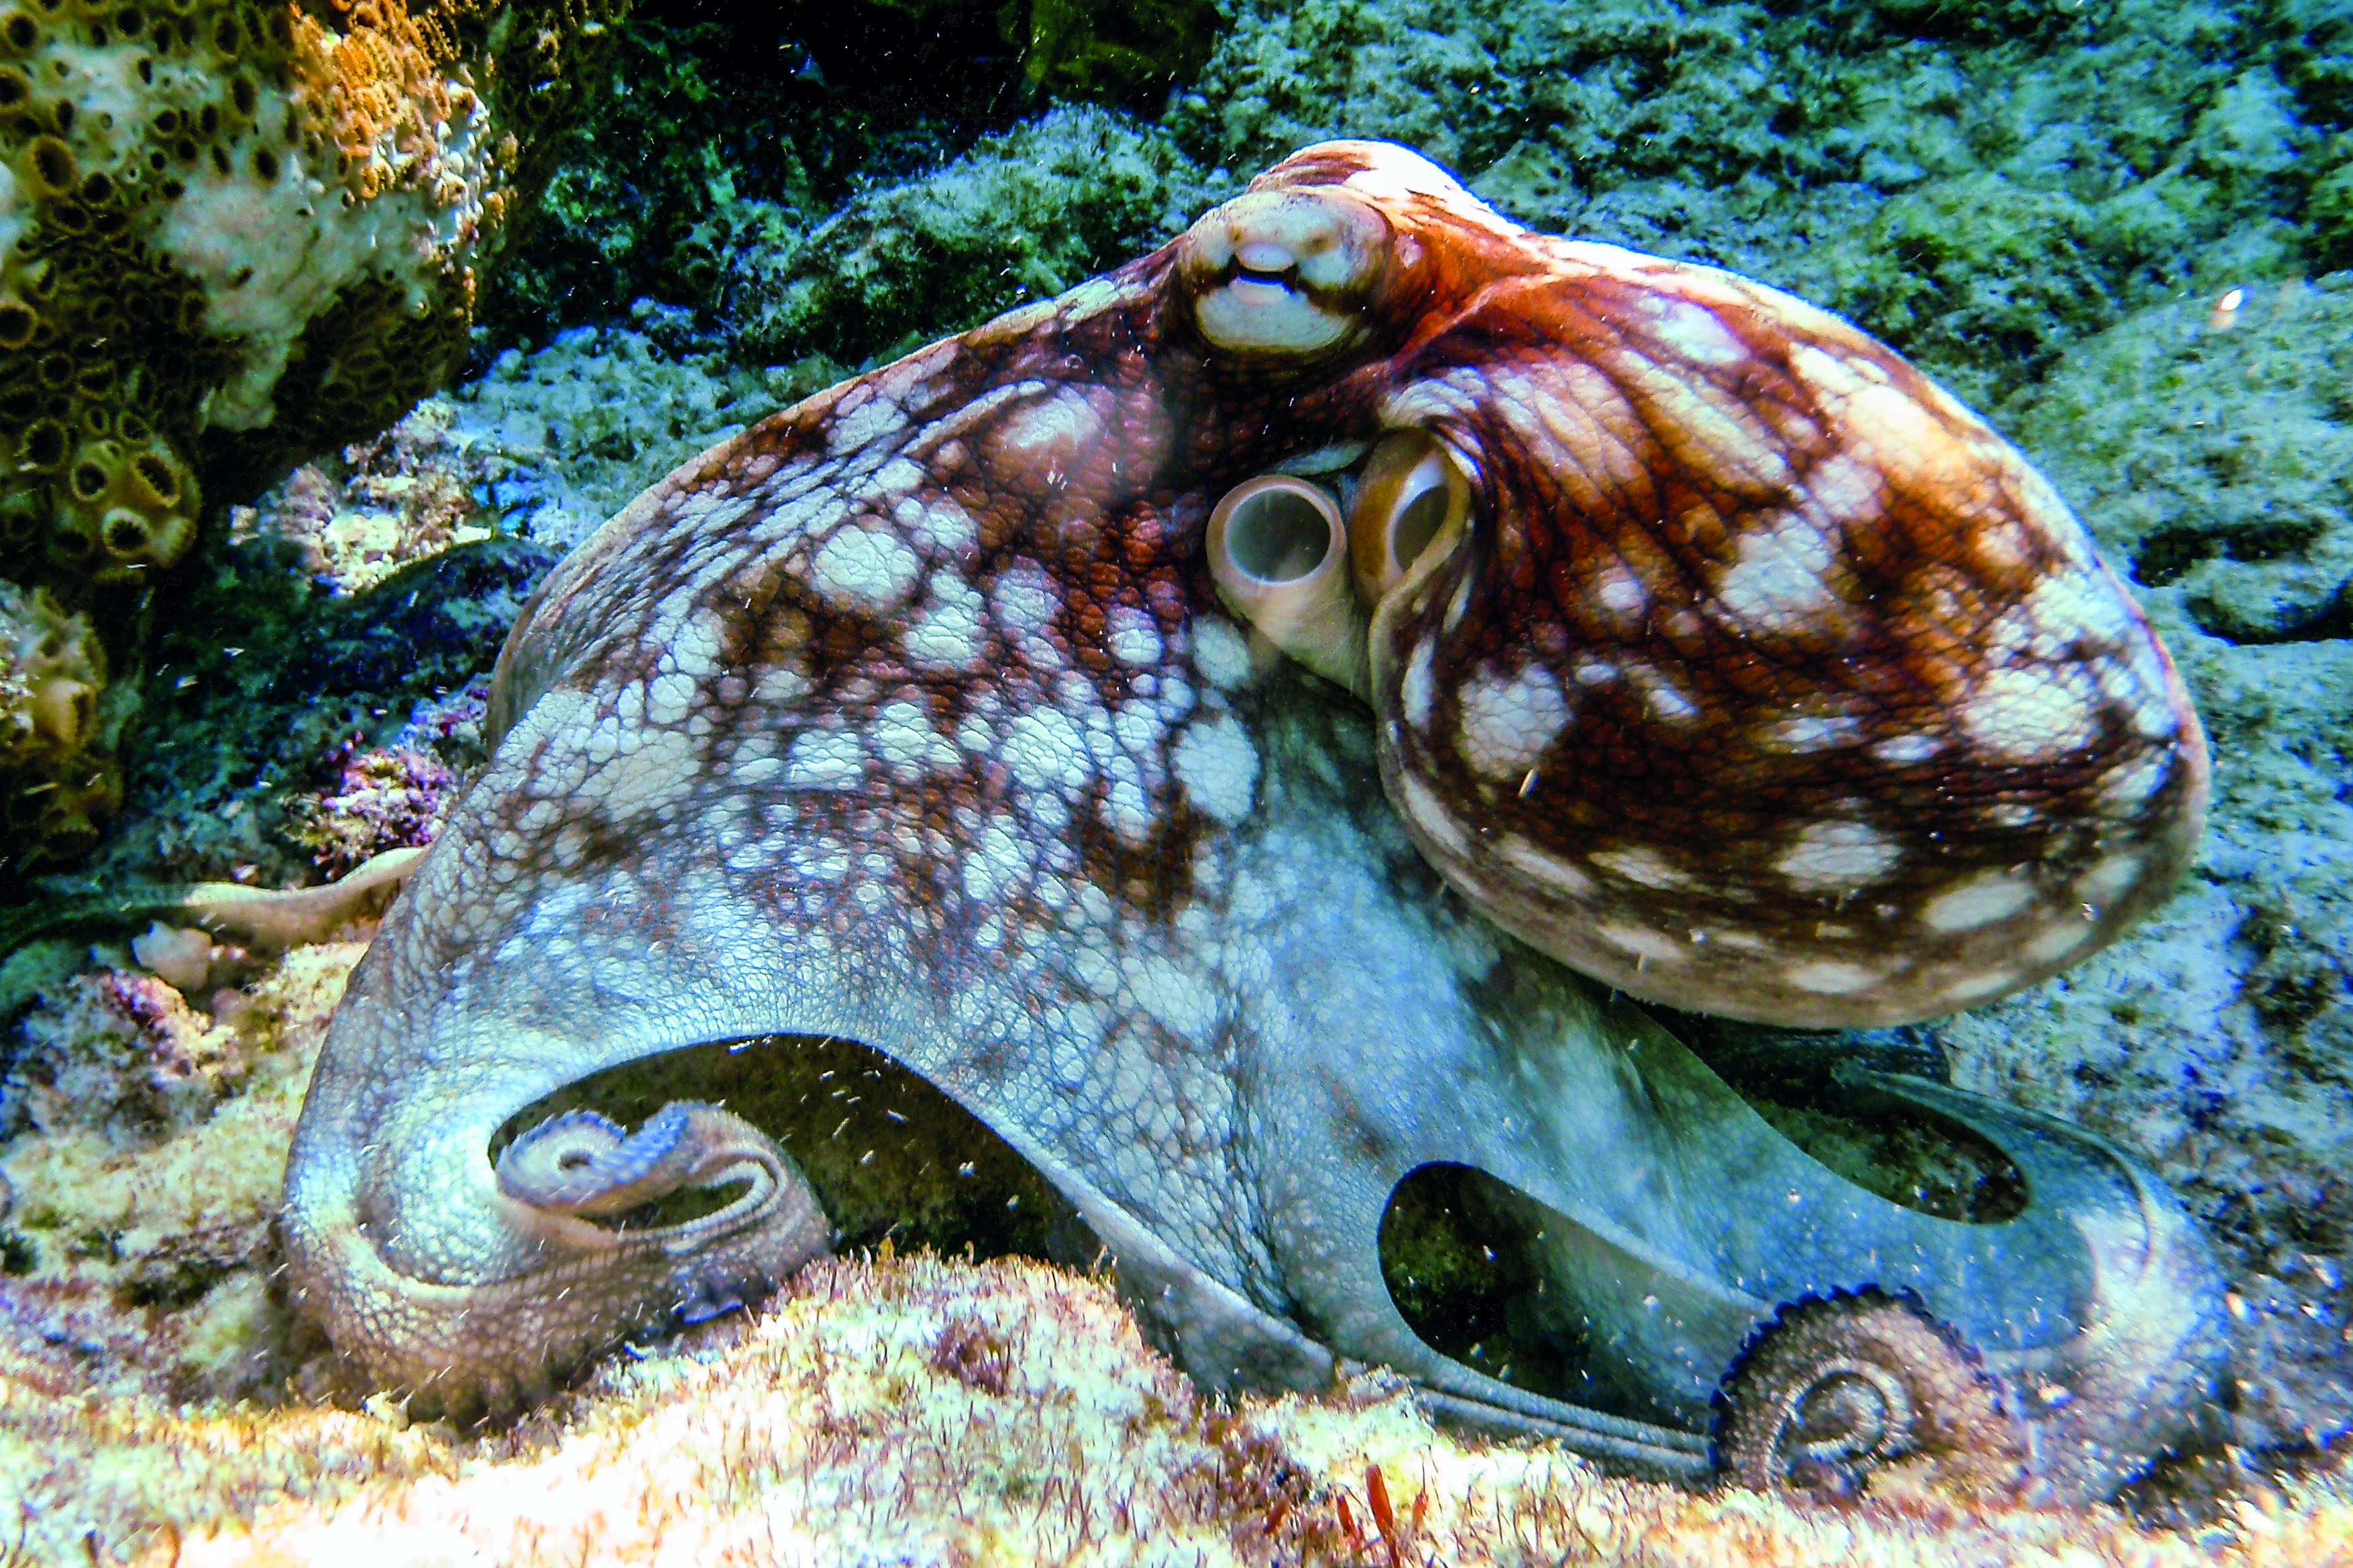 The protected marine fauna  here is everywhere, just like this imposing octopus.